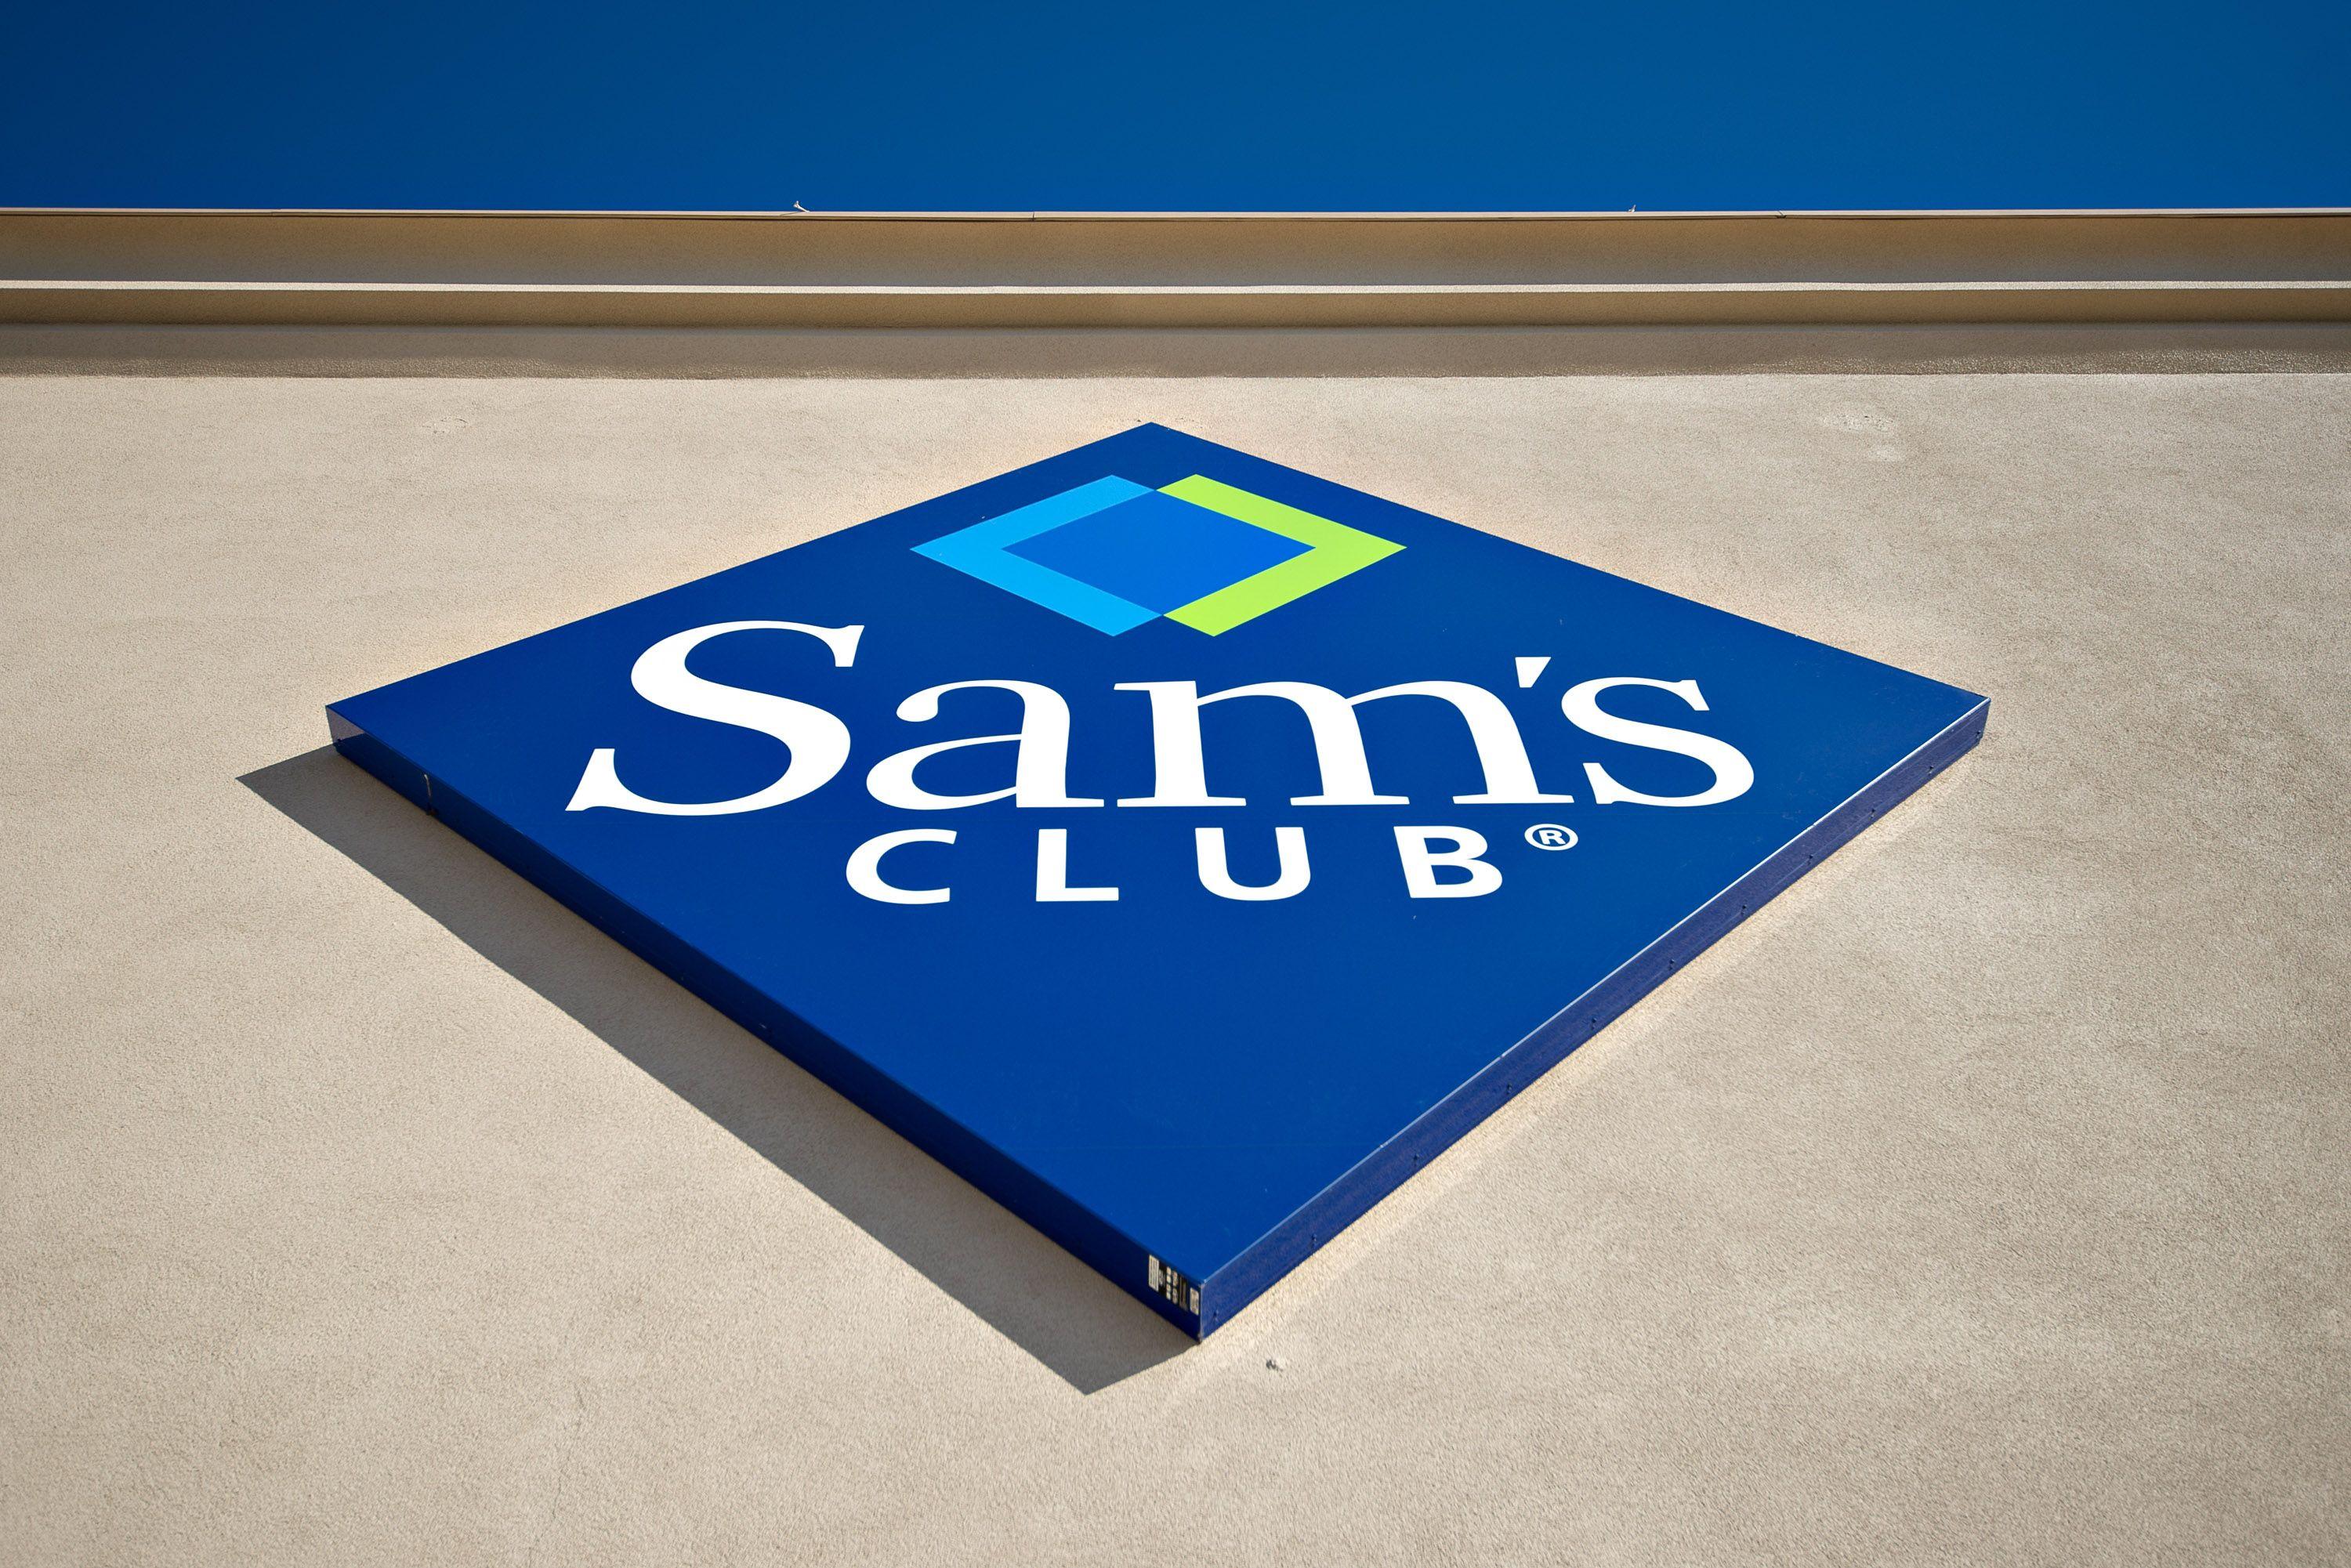 Sam's Club Official Logo - Costco Members Can Shop at Sam's Clubs For Free Until July 4 | Fortune